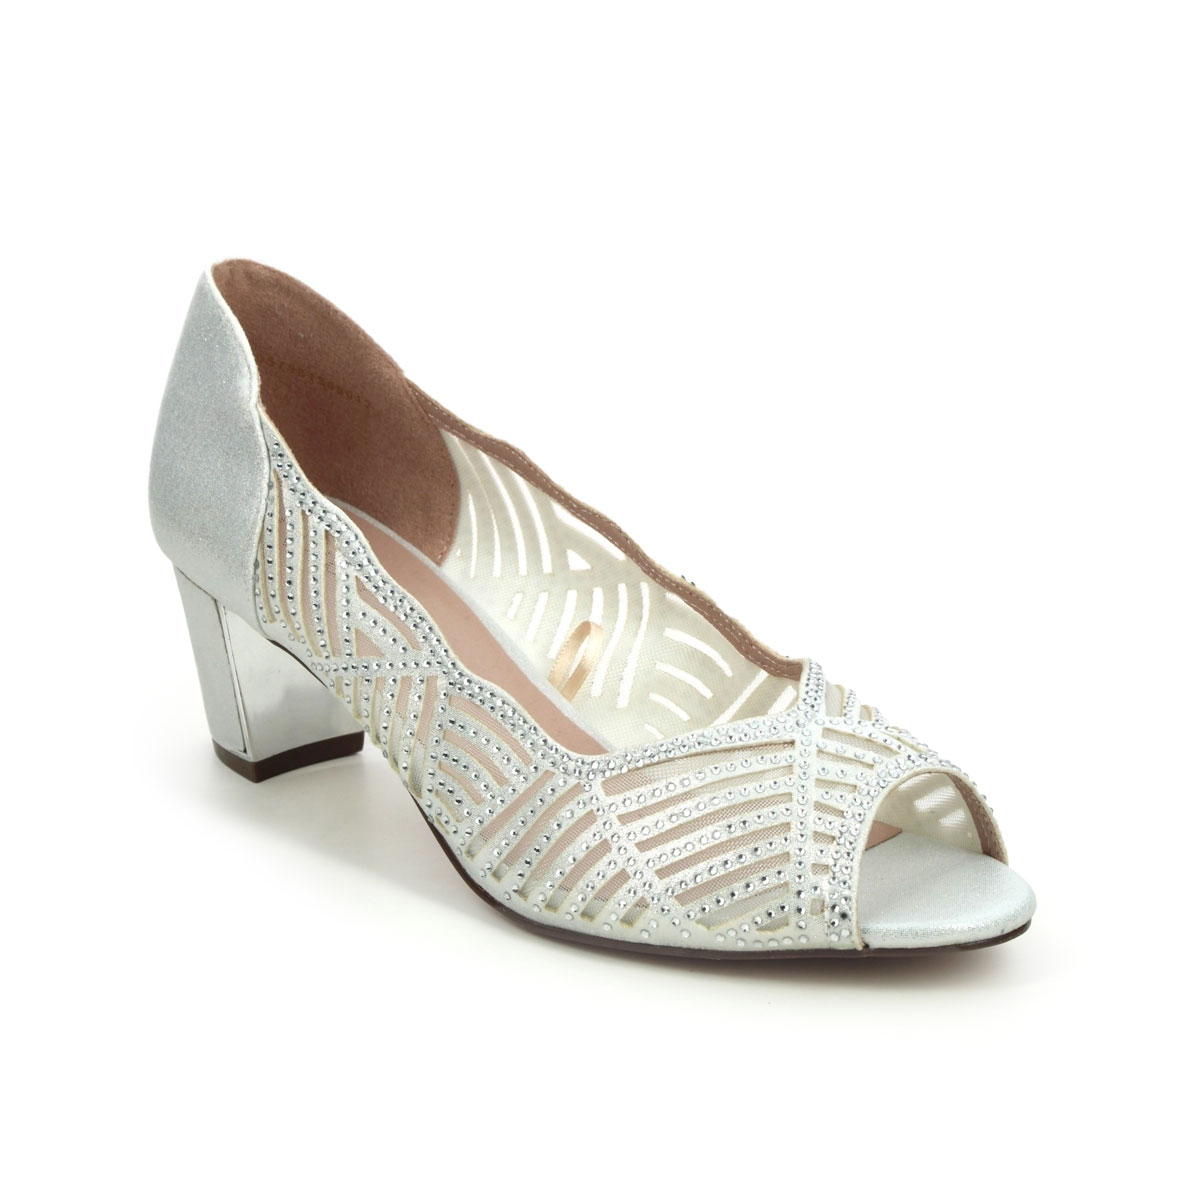 Lotus Immy Attica Nar Off white Womens Court Shoes in a Plain Textile in Size 5